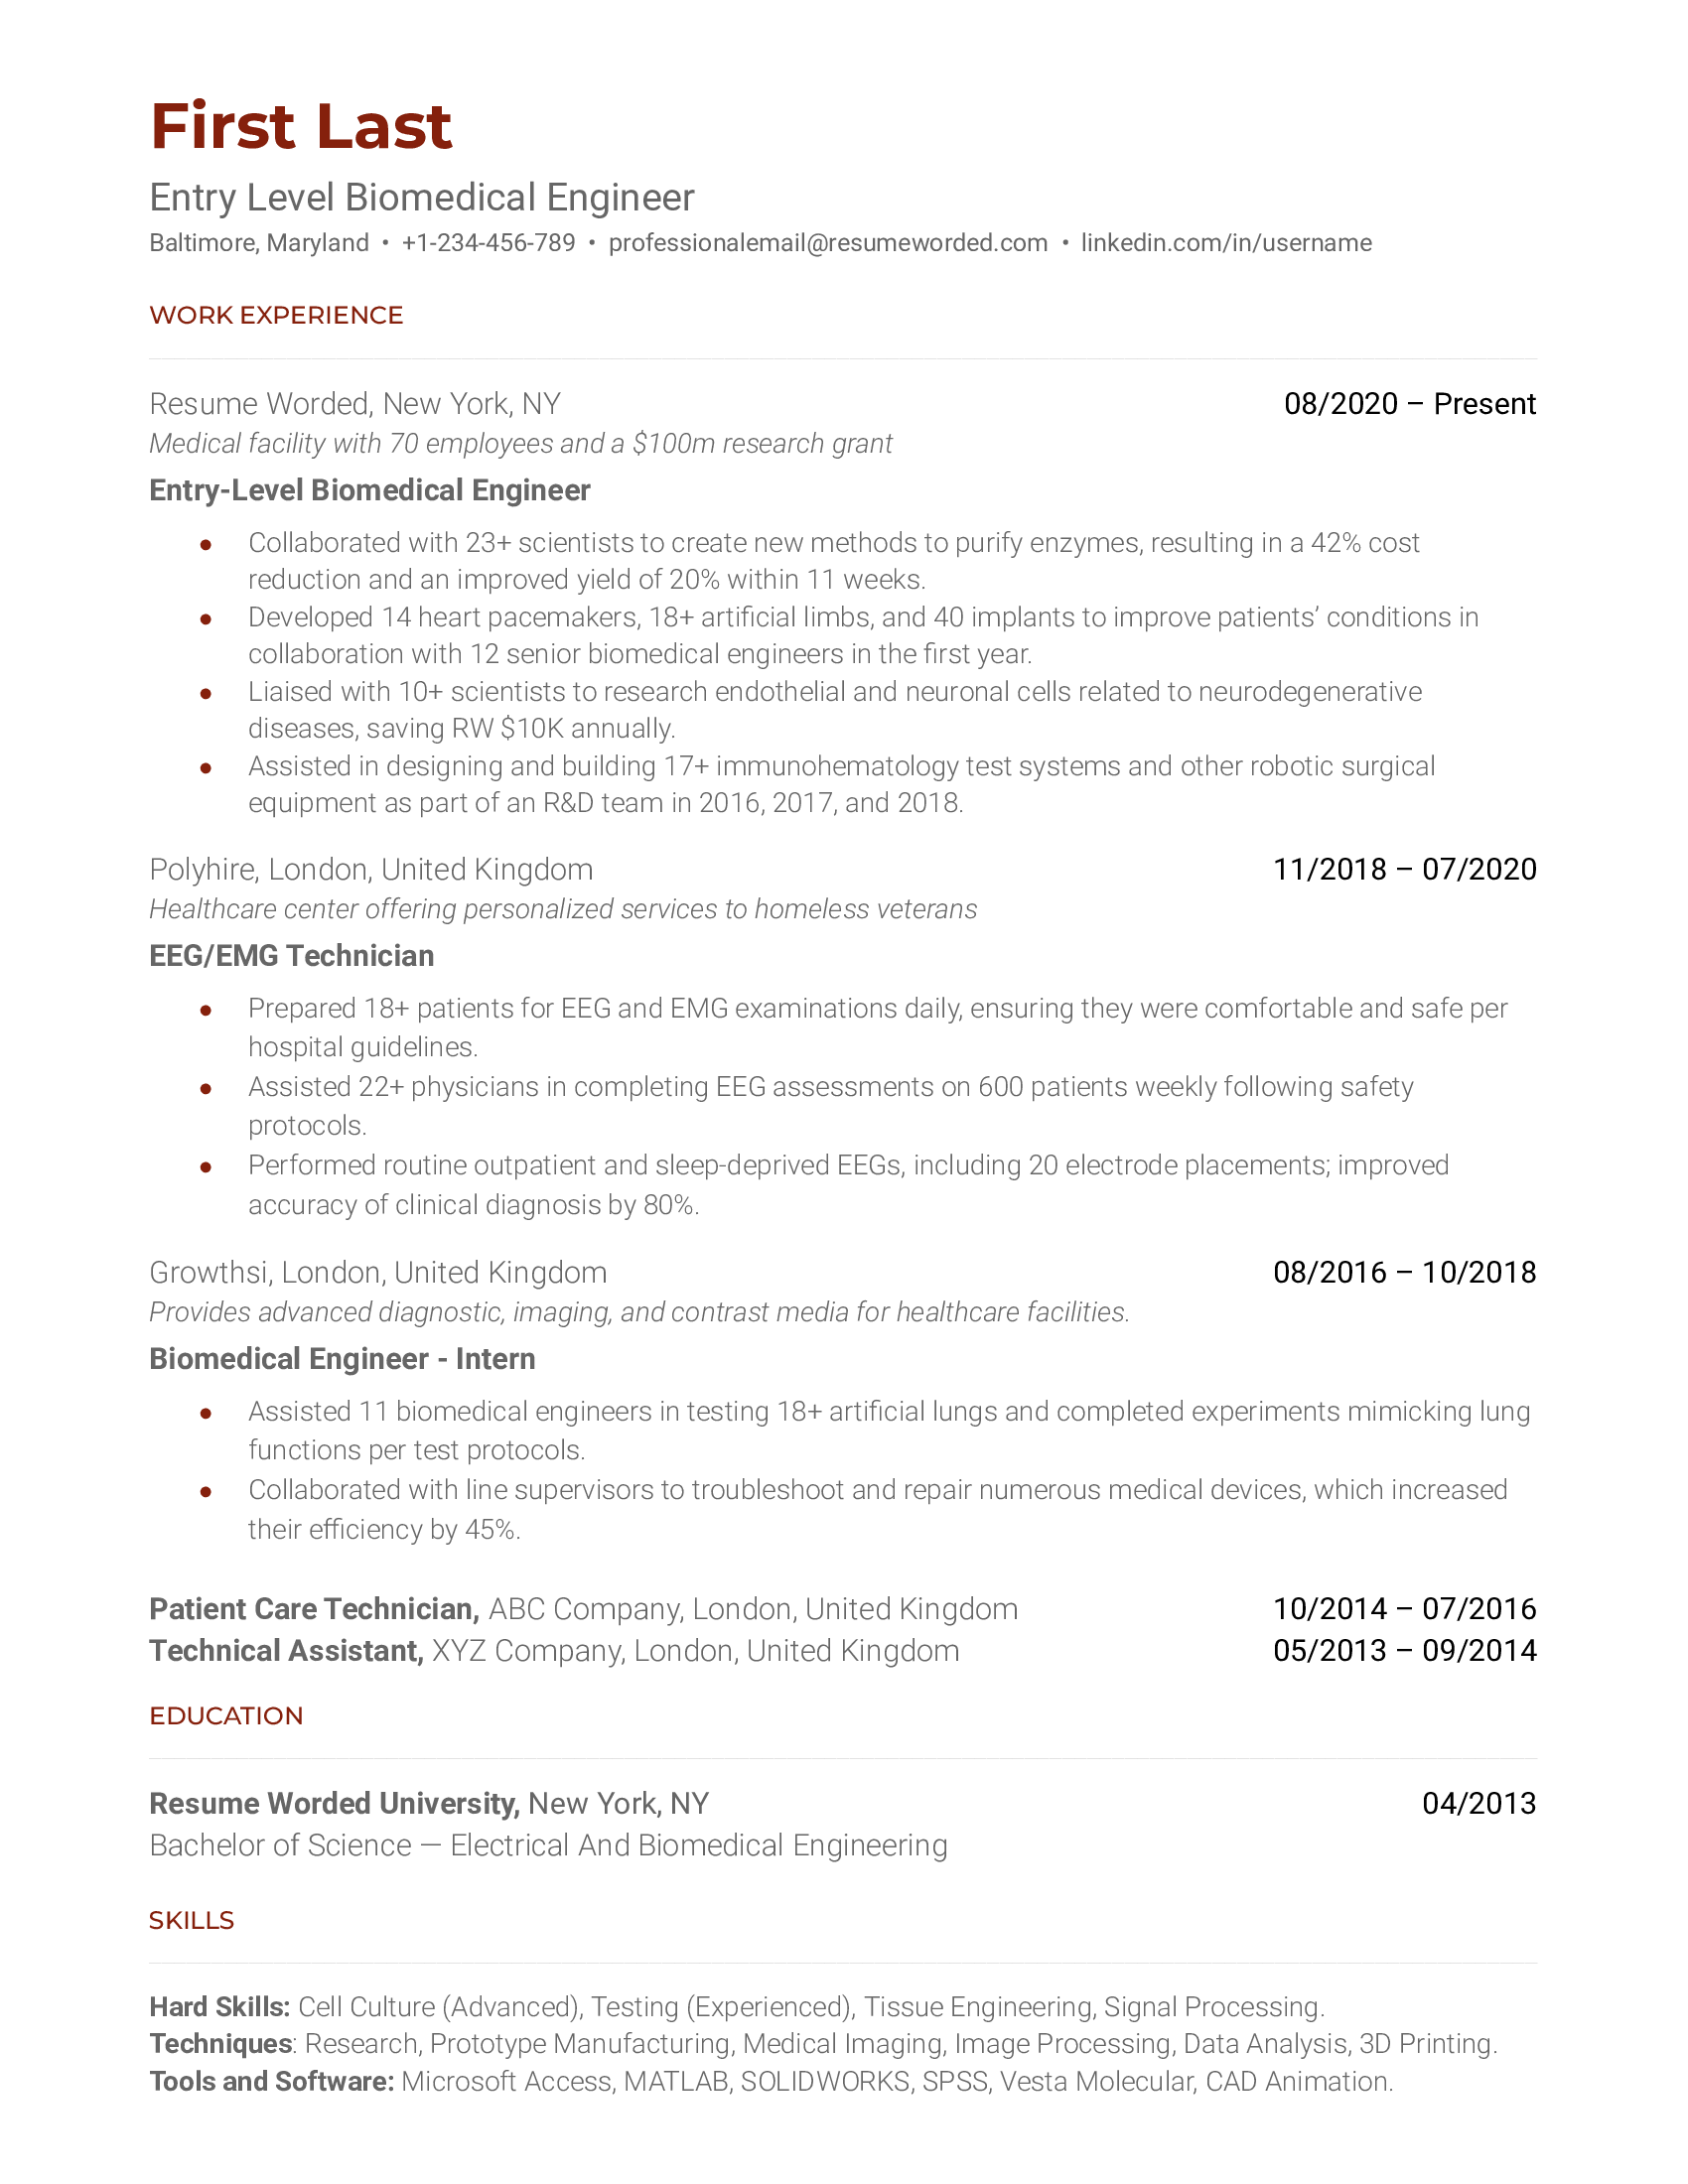 Entry Level Biomedical Engineer Resume Example for 2023 | Resume Worded